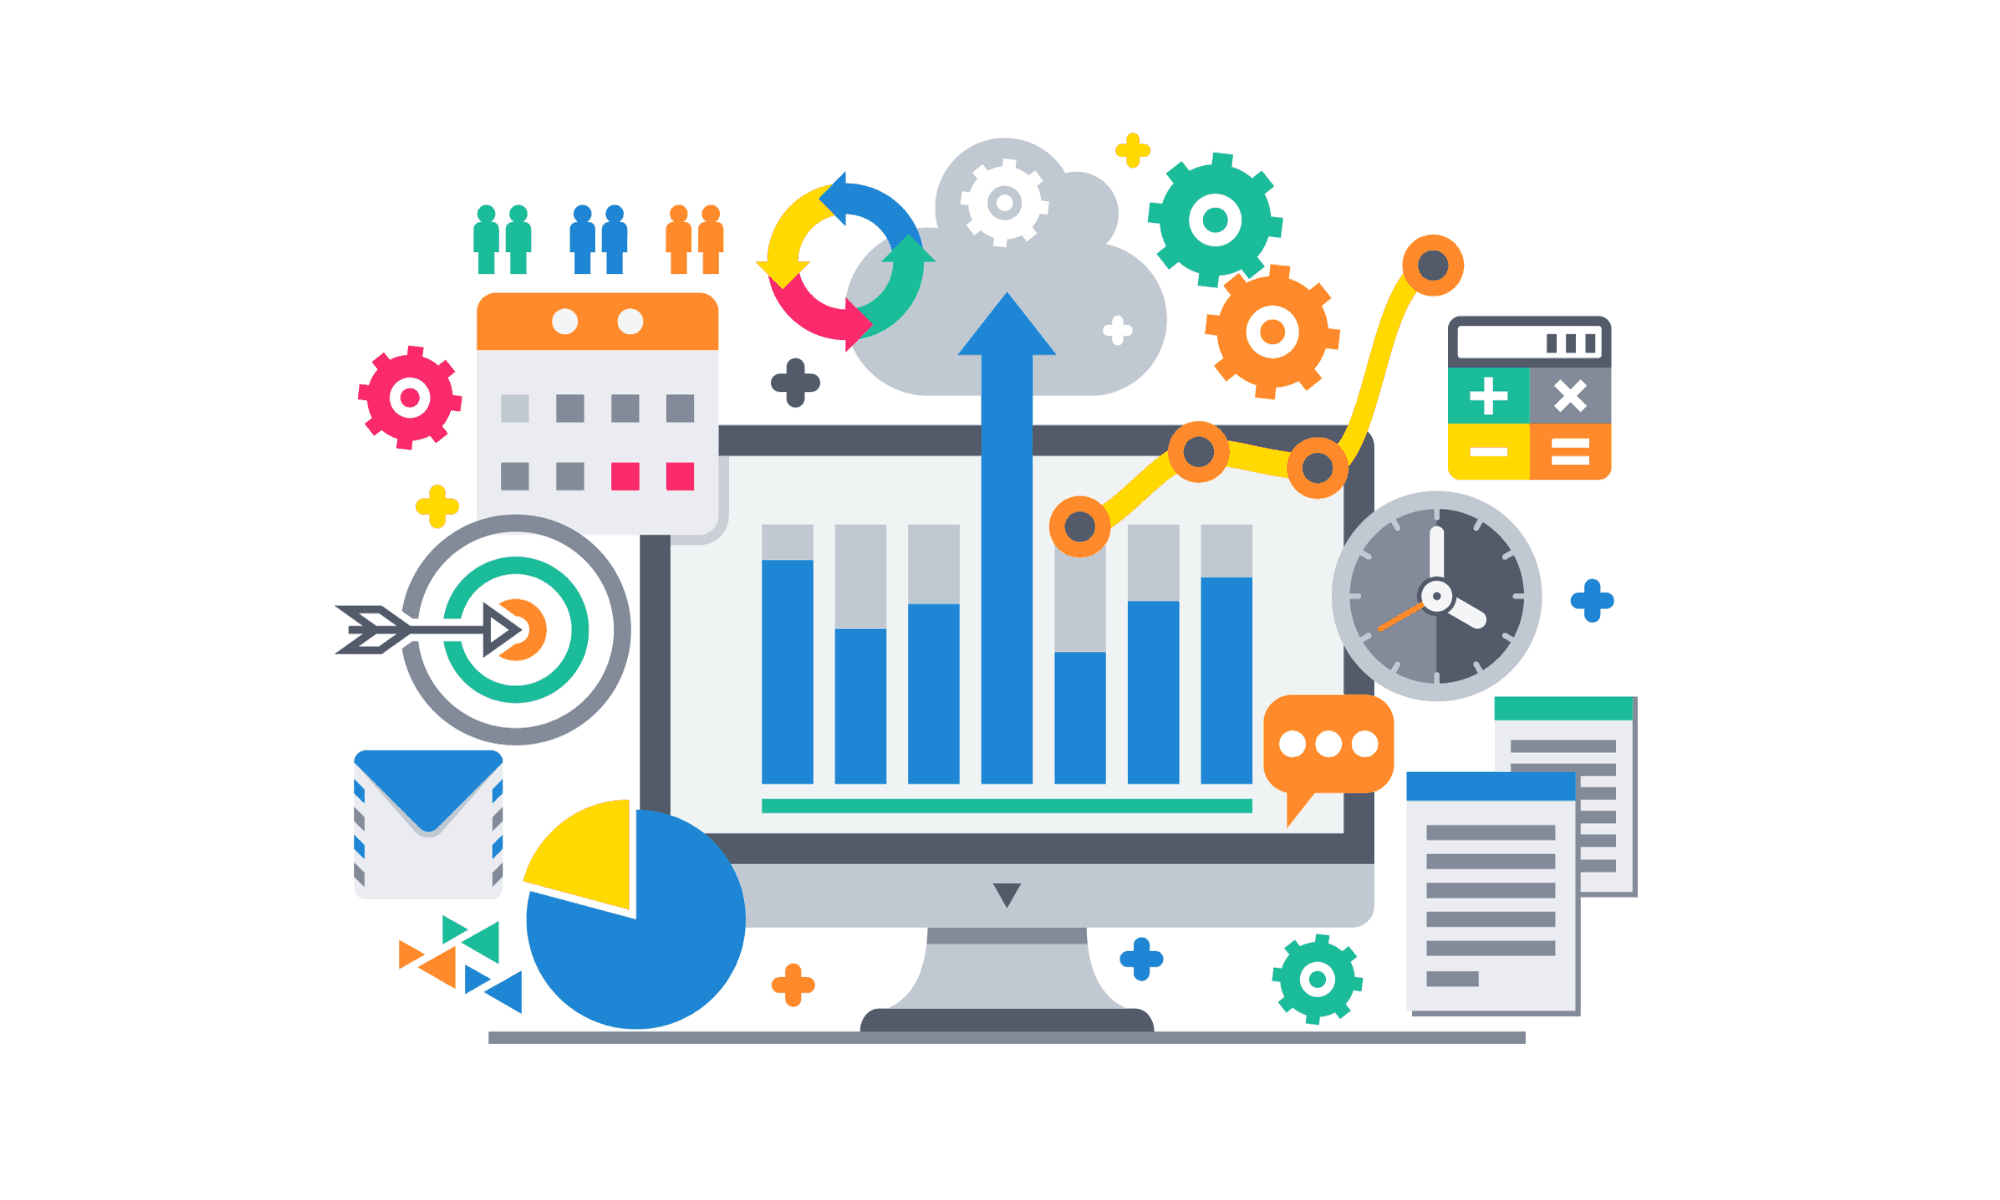 Important website metrics and content monitoring